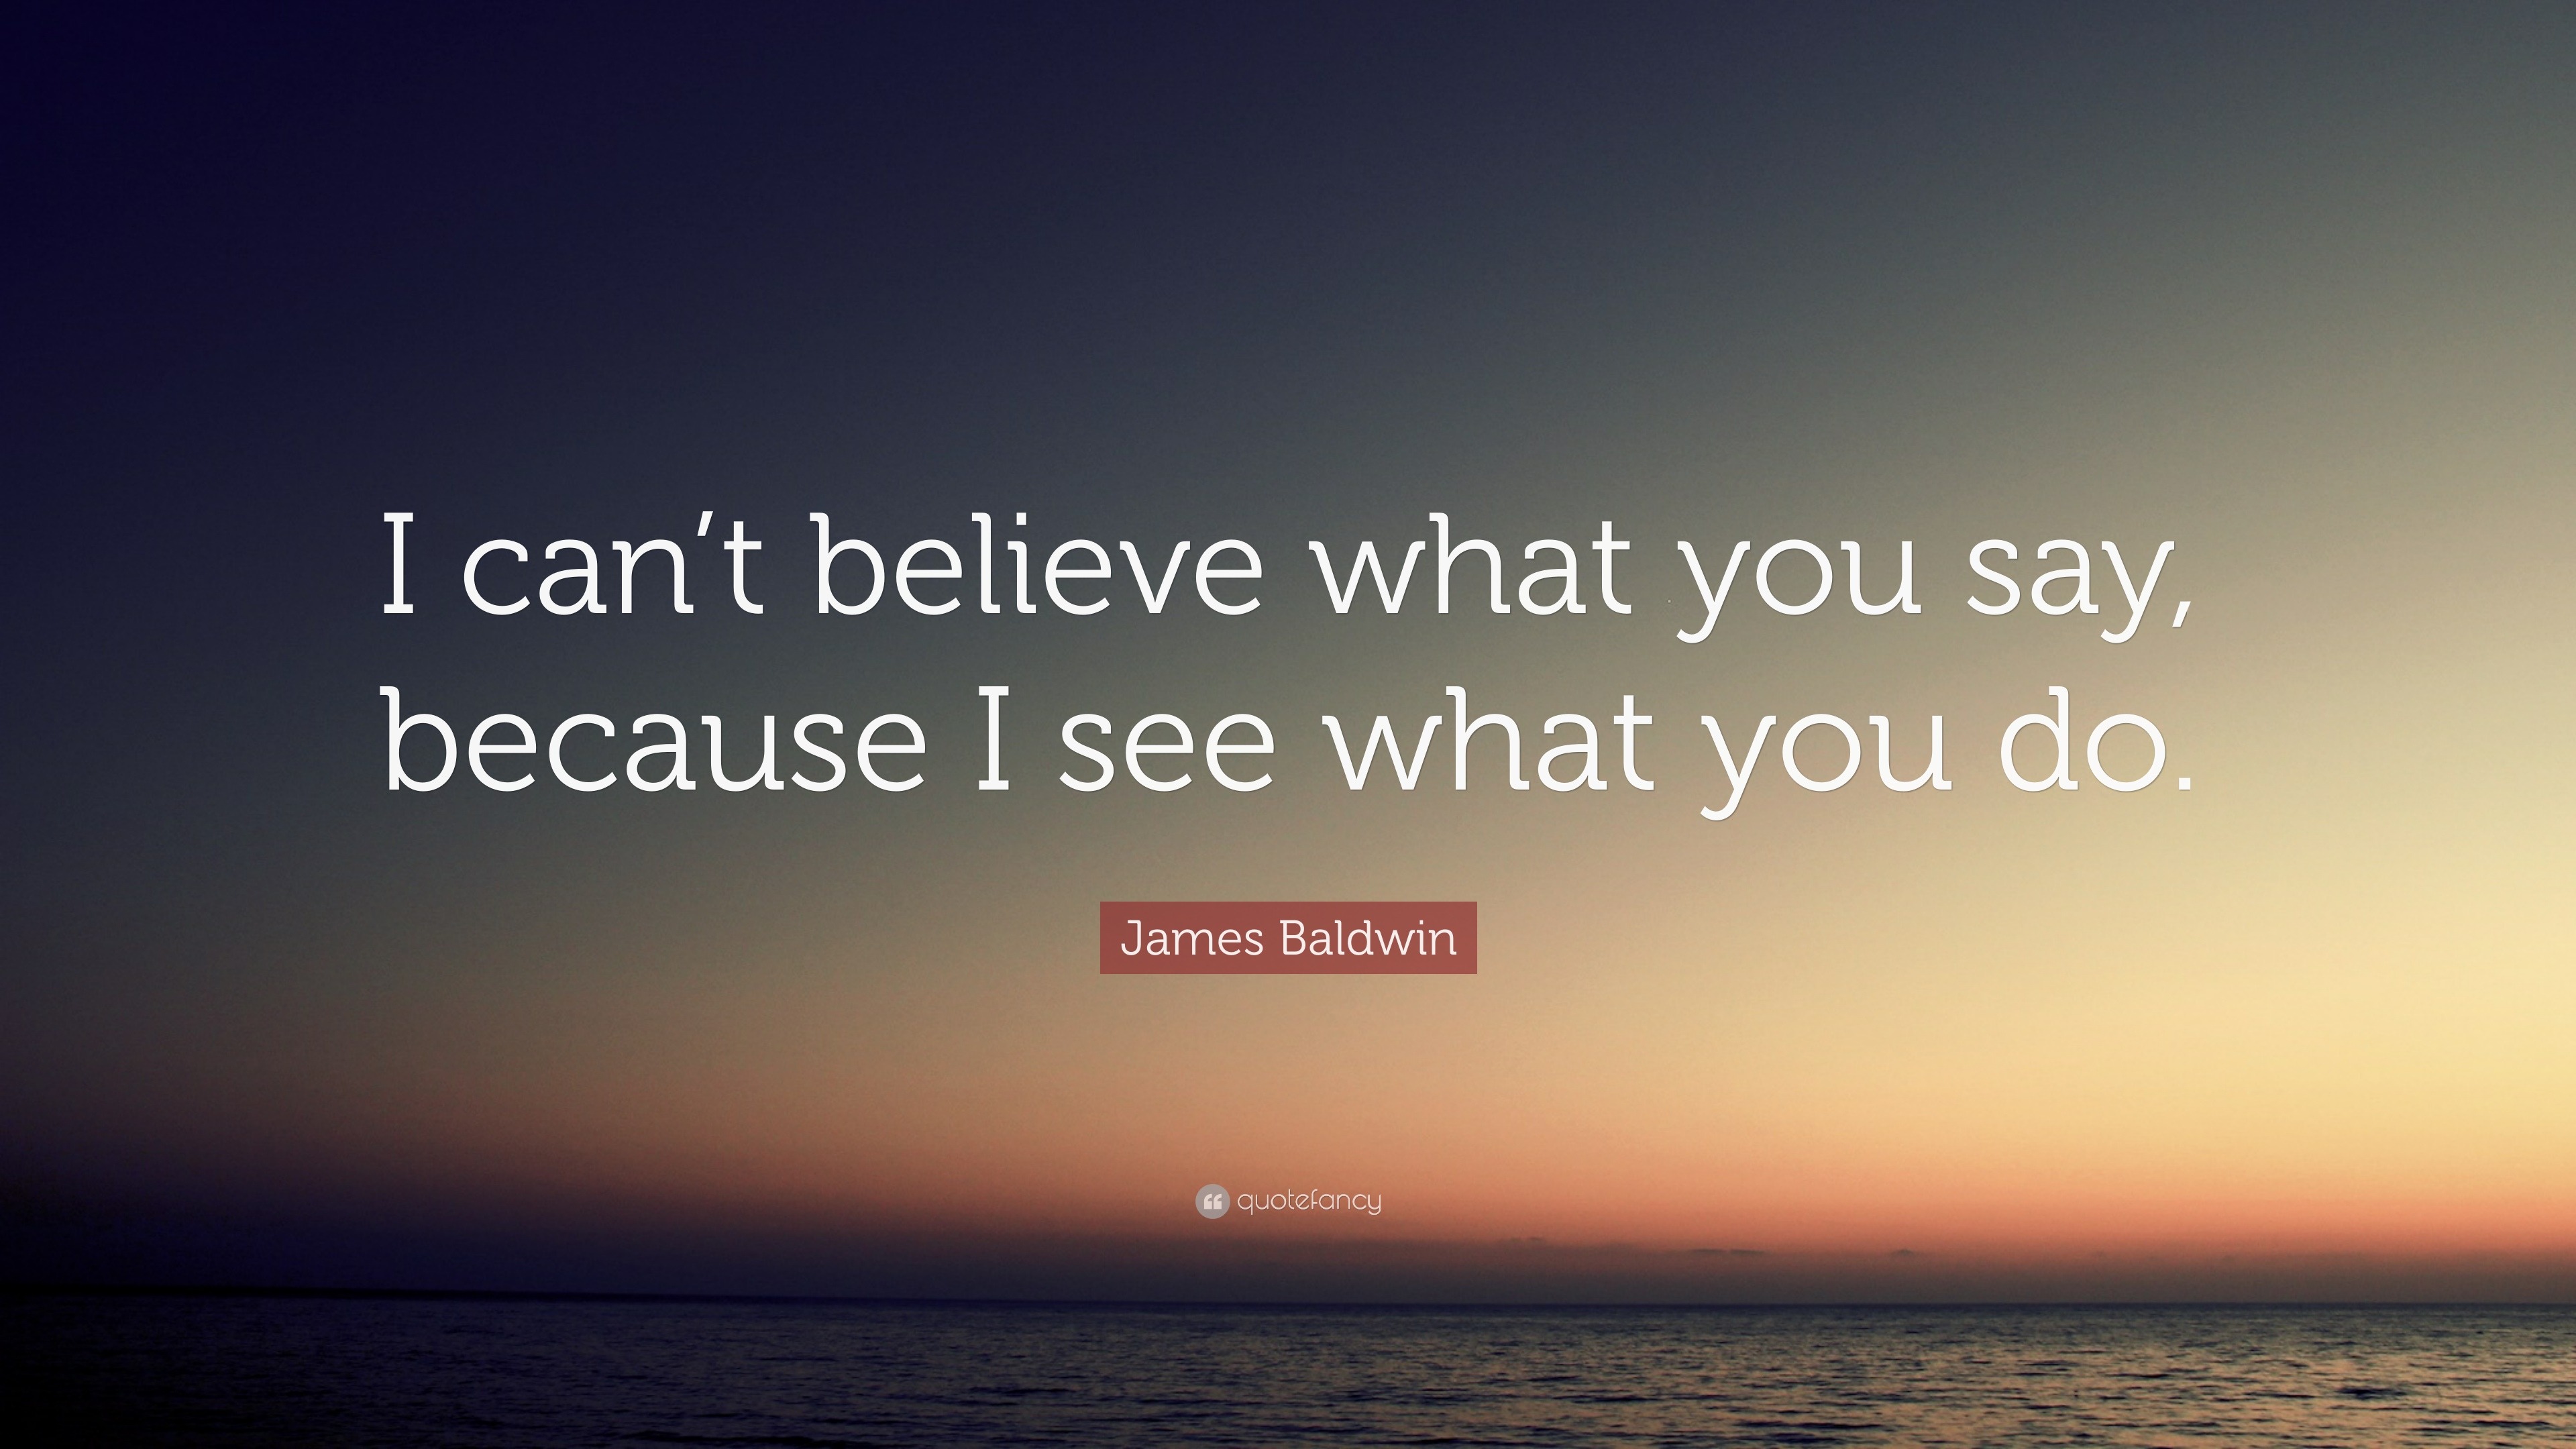 https://quotefancy.com/media/wallpaper/3840x2160/1785269-James-Baldwin-Quote-I-can-t-believe-what-you-say-because-I-see.jpg